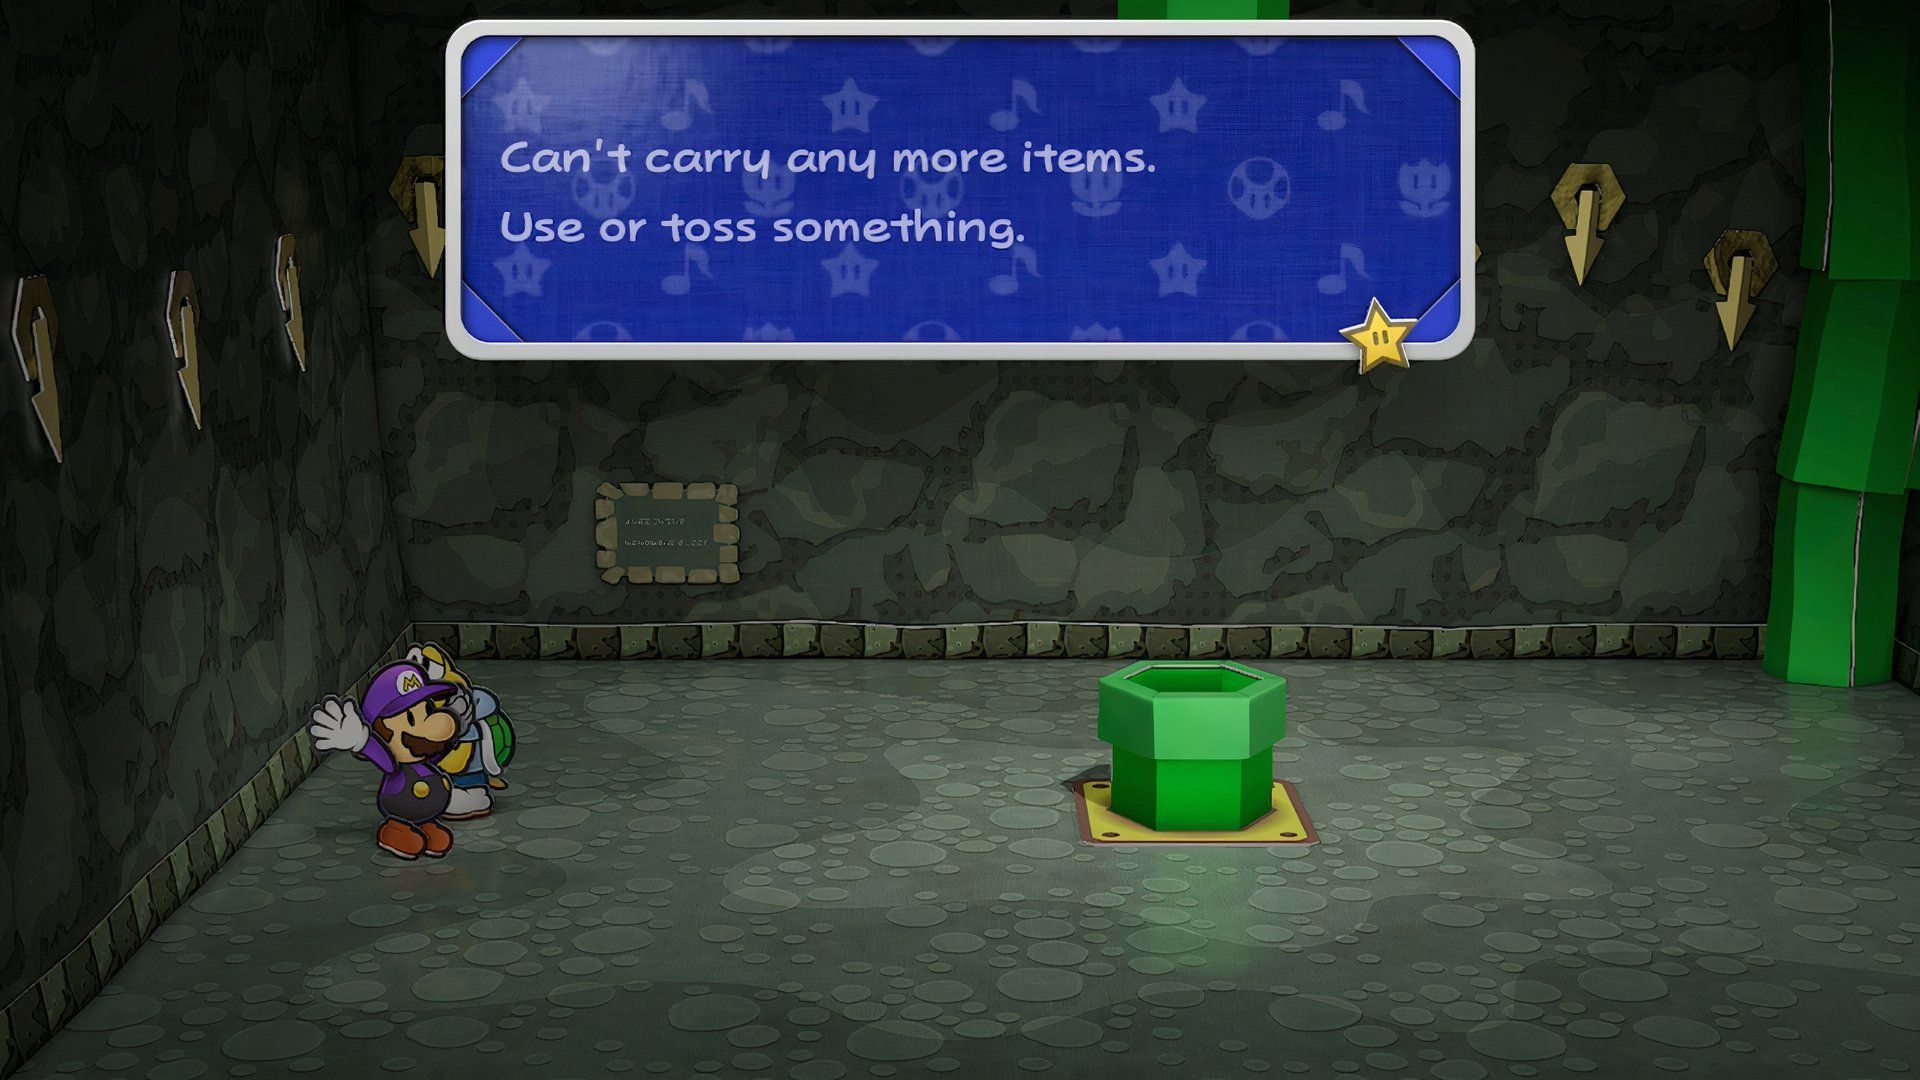 Paper Mario: The Thousand-Year Door - Can't Carry Any More Items